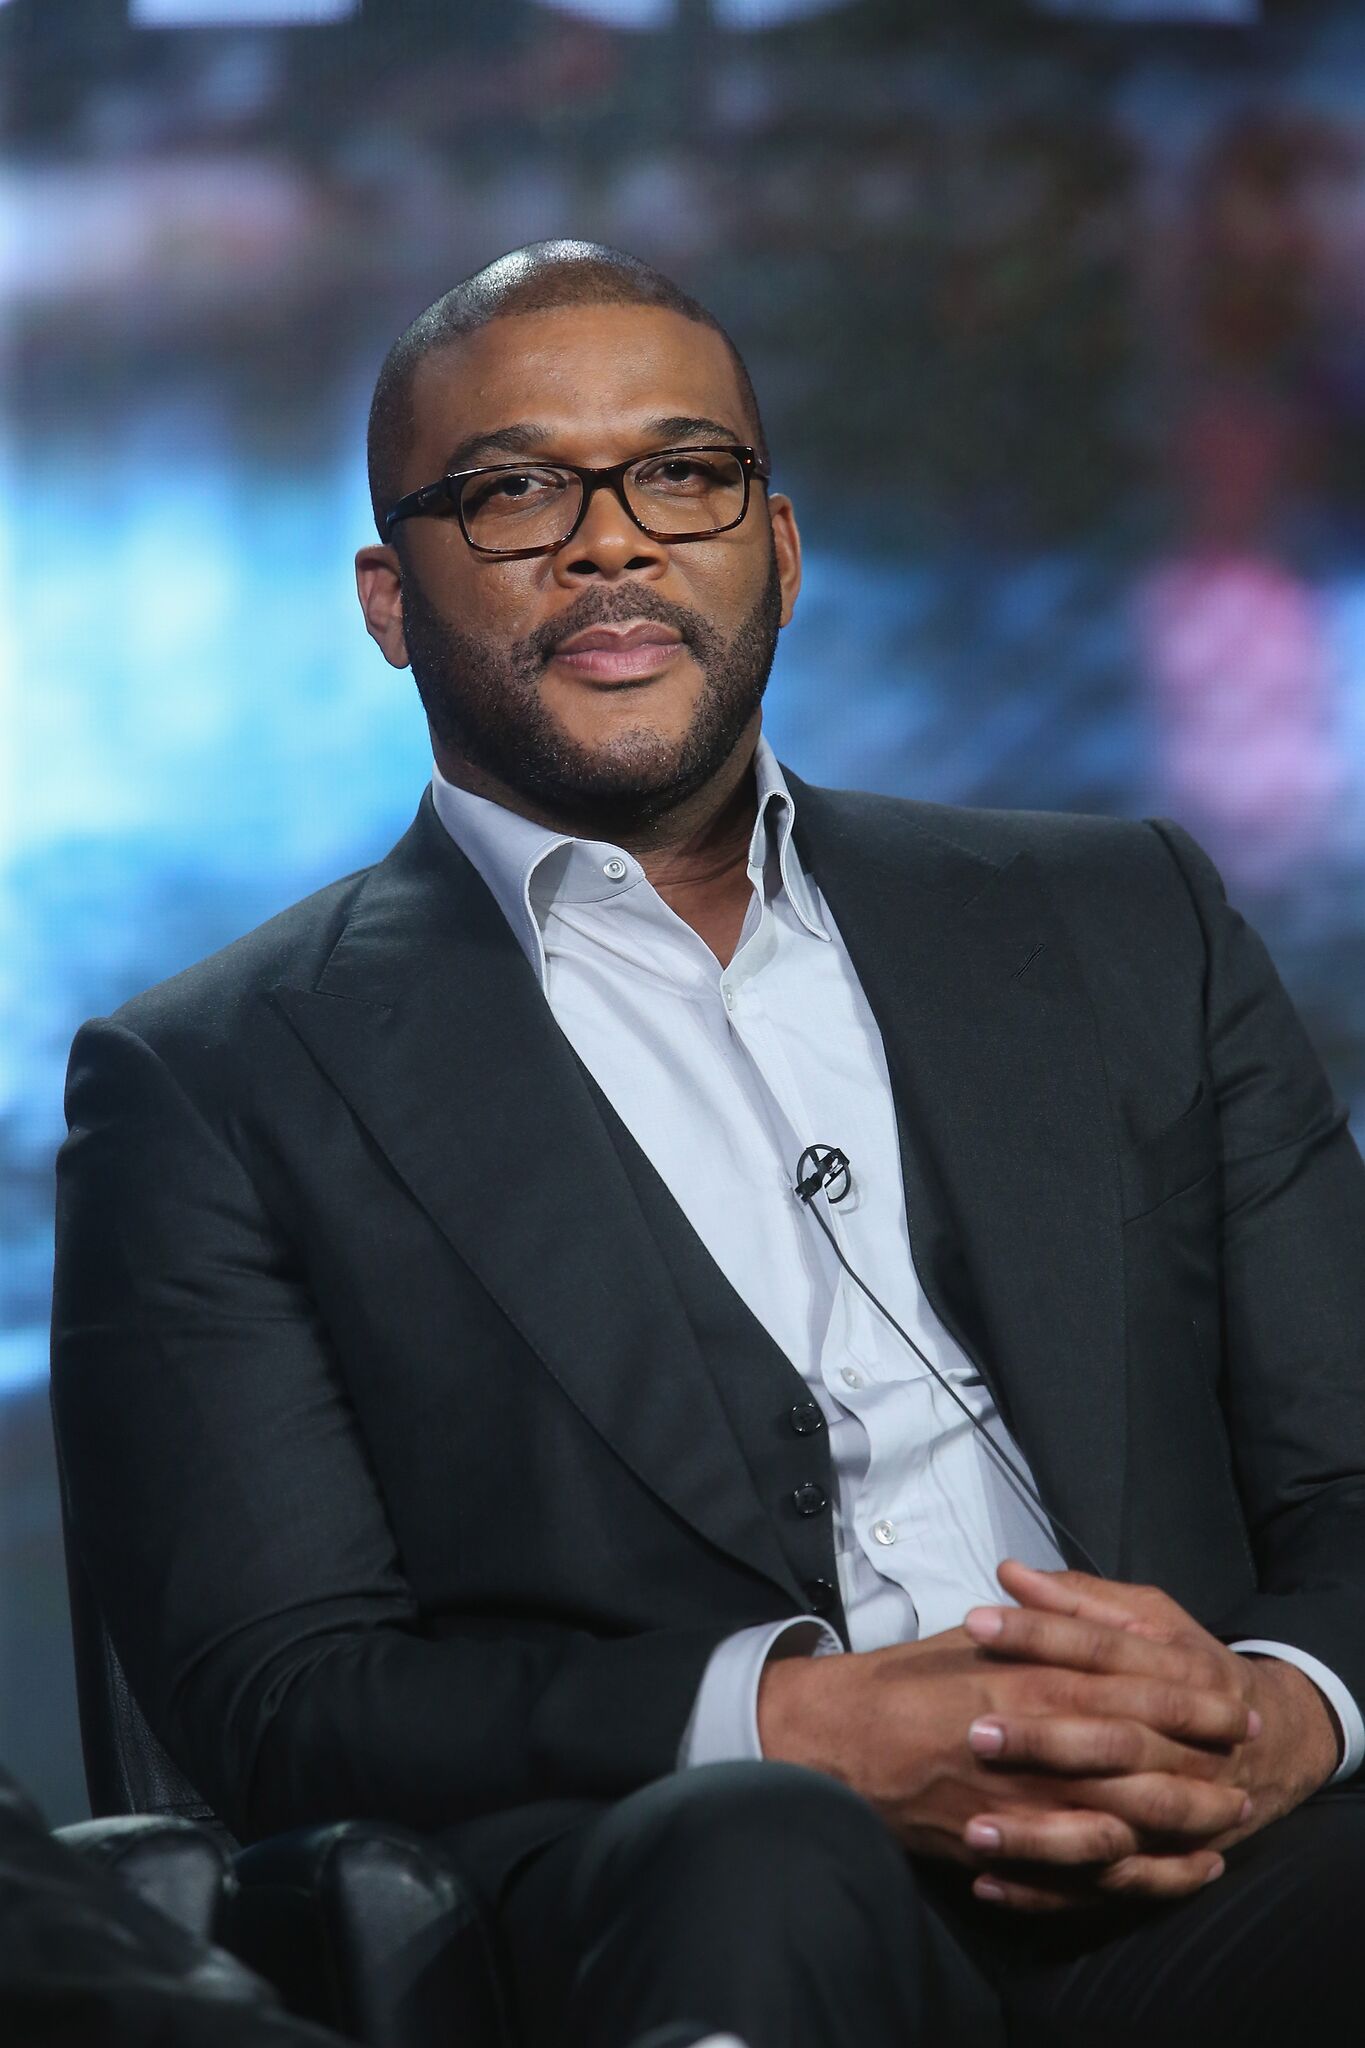  Tyler Perry during "The Passion" panel discussion at the FOX portion of the 2015 Winter TCA Tour. | Source: Getty Images